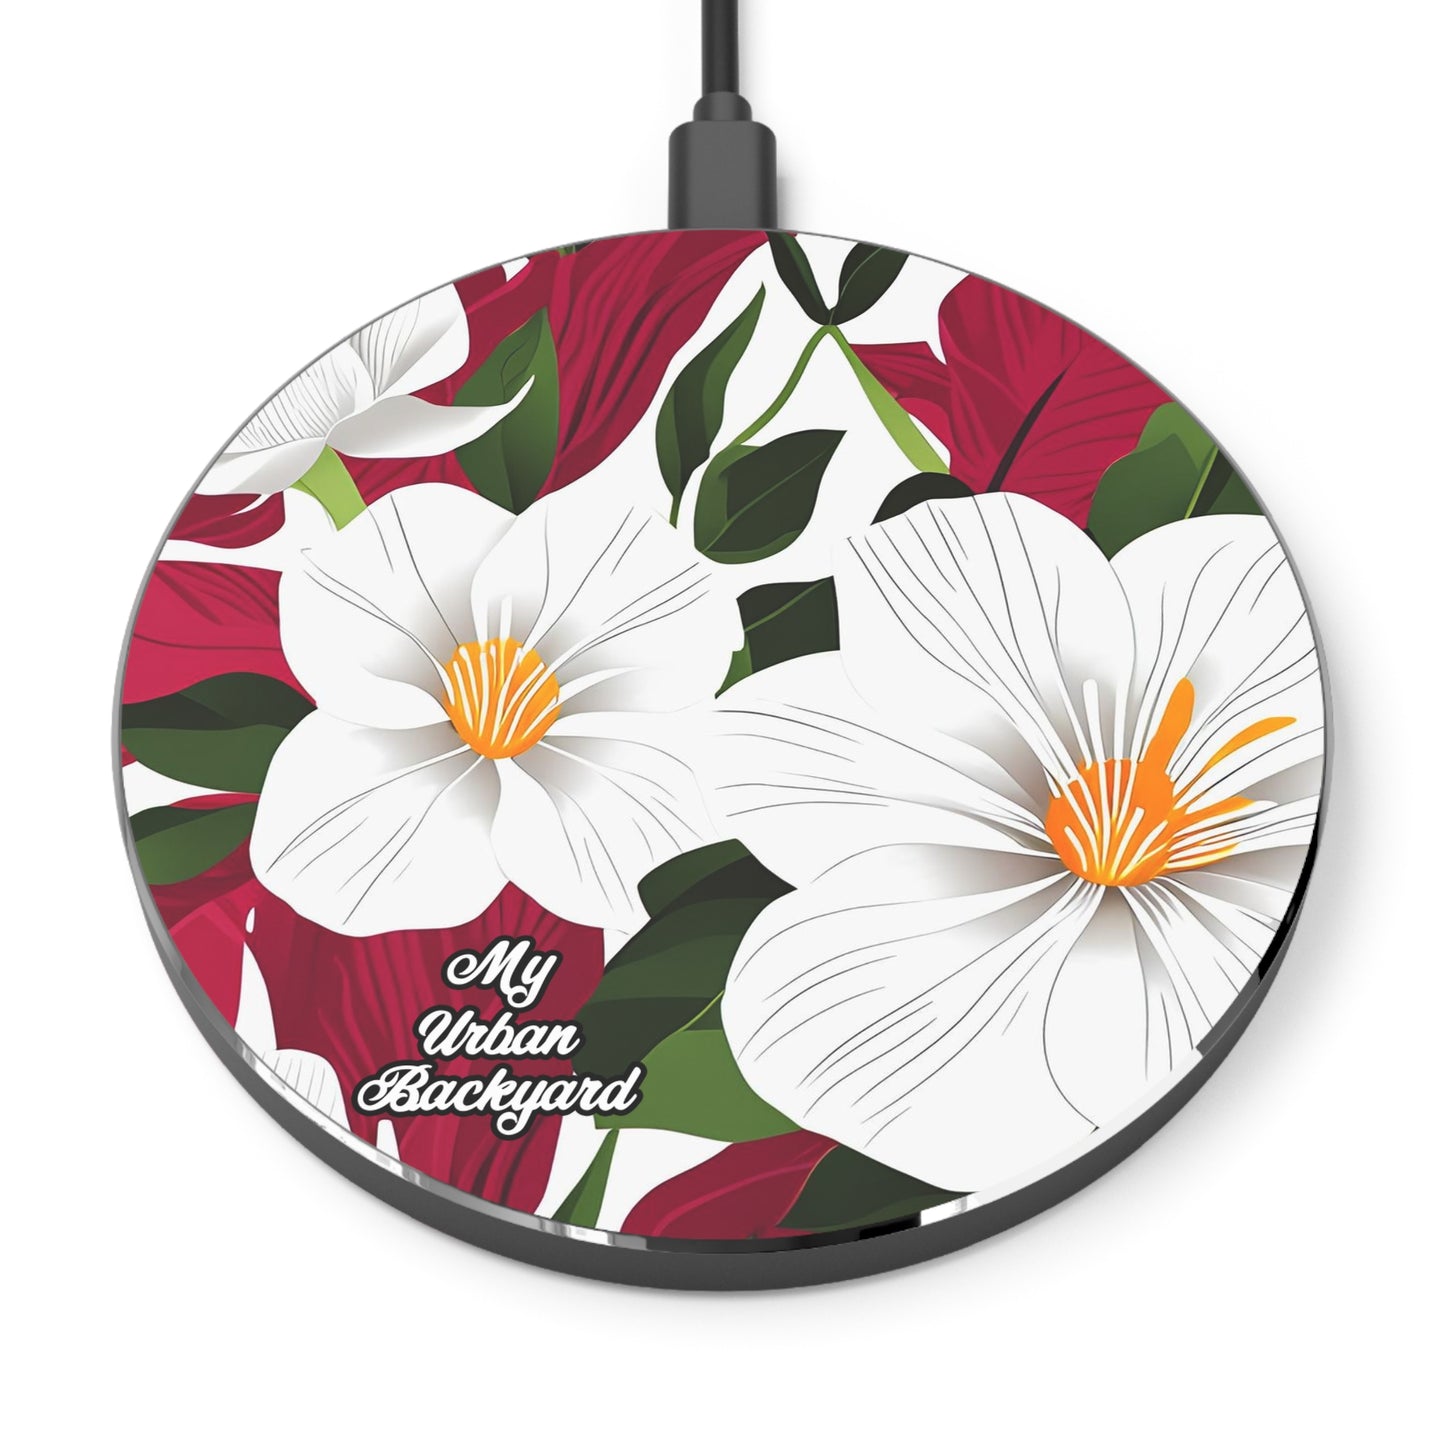 Wireless Cell Phone Charger for iPhone or Android - White Flowers on Red